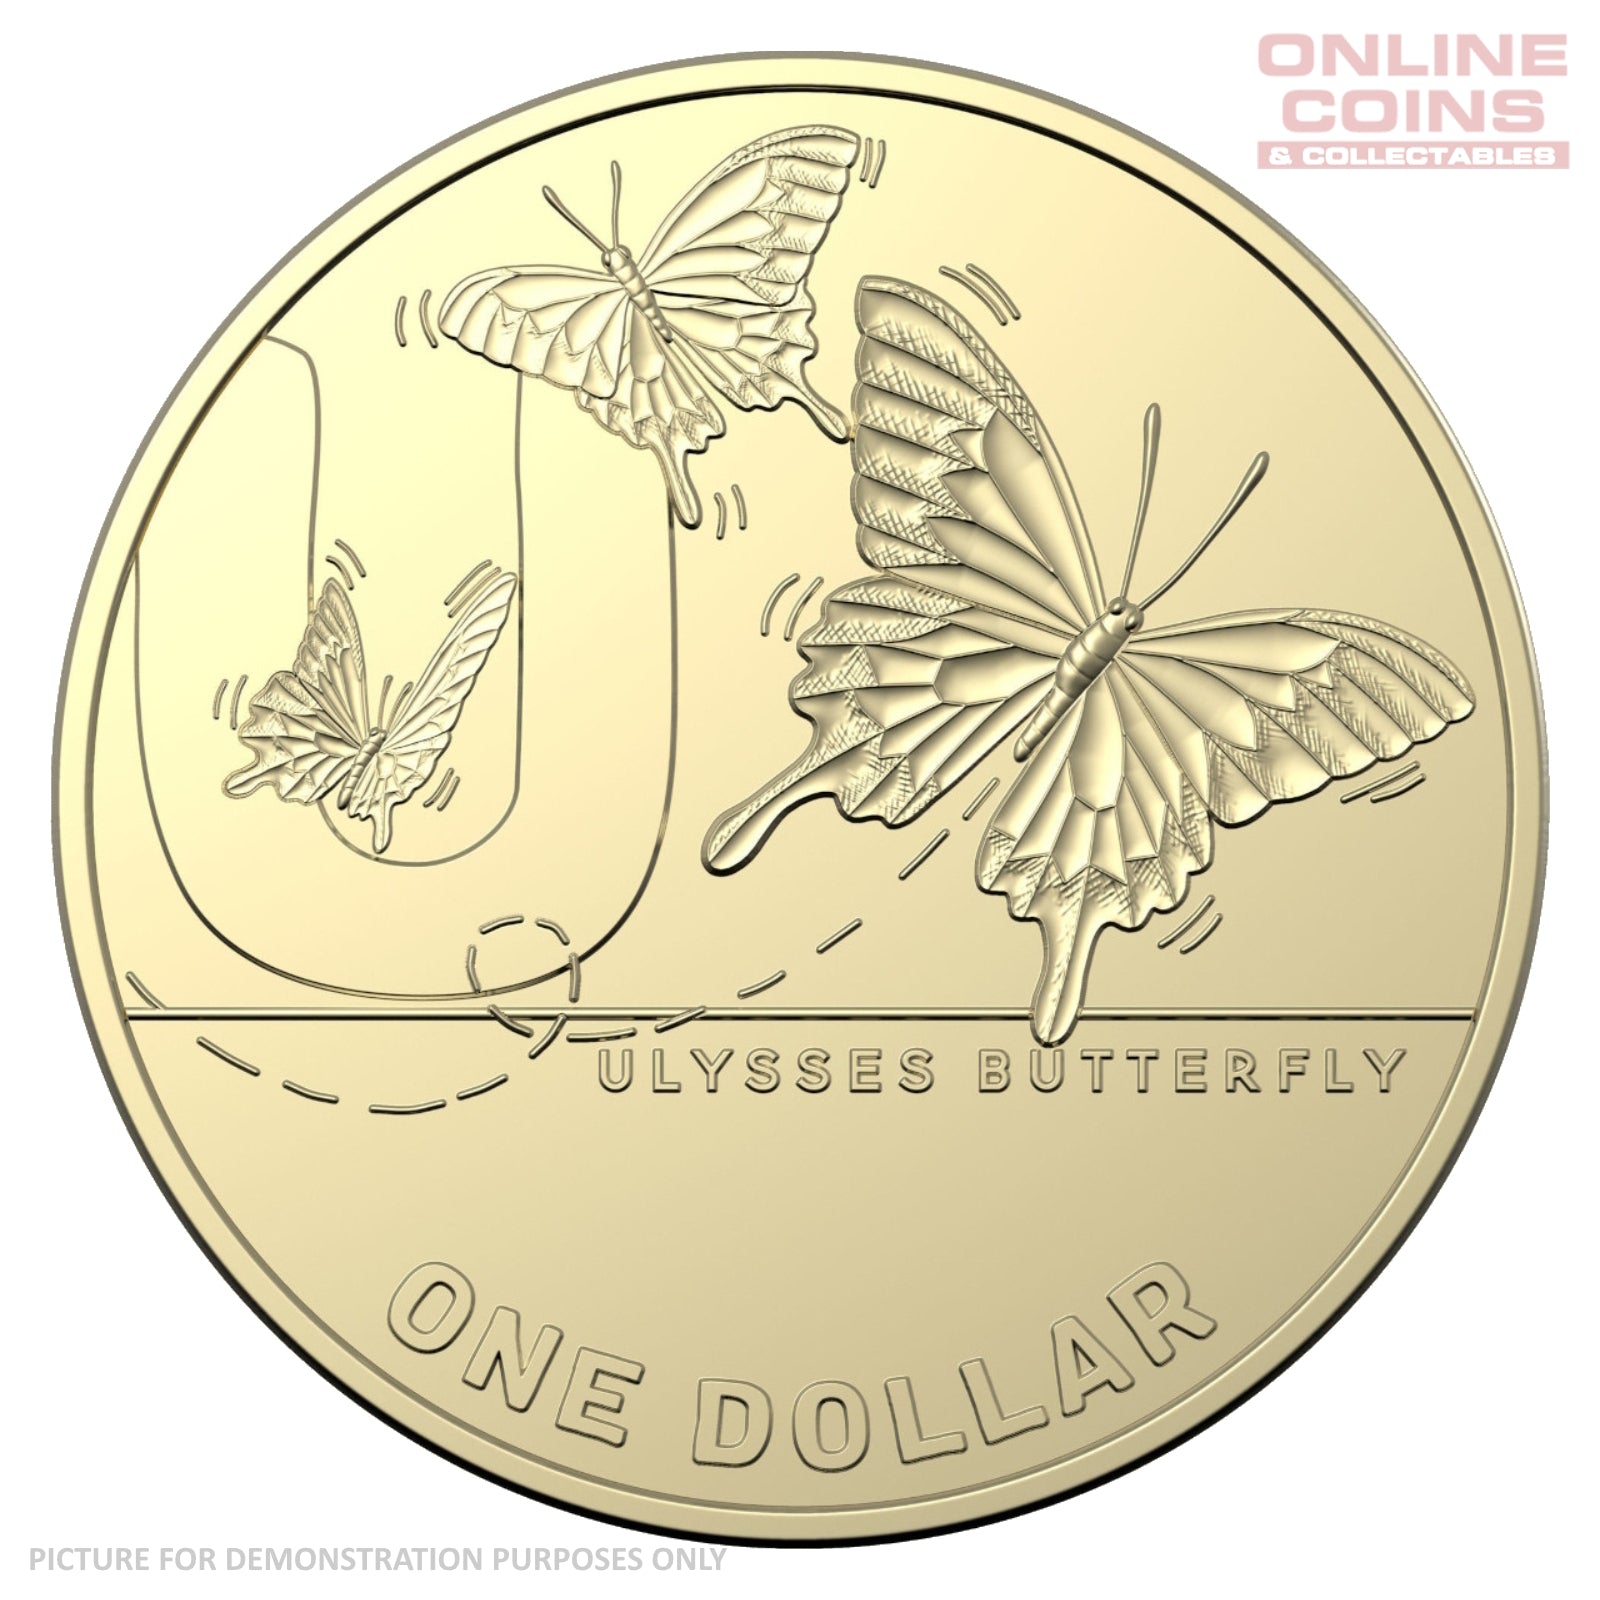 2021 Australian $1 Coin Hunt 2 U For Ulysses Butterfly - Uncirculated Loose Coin From Security Bag